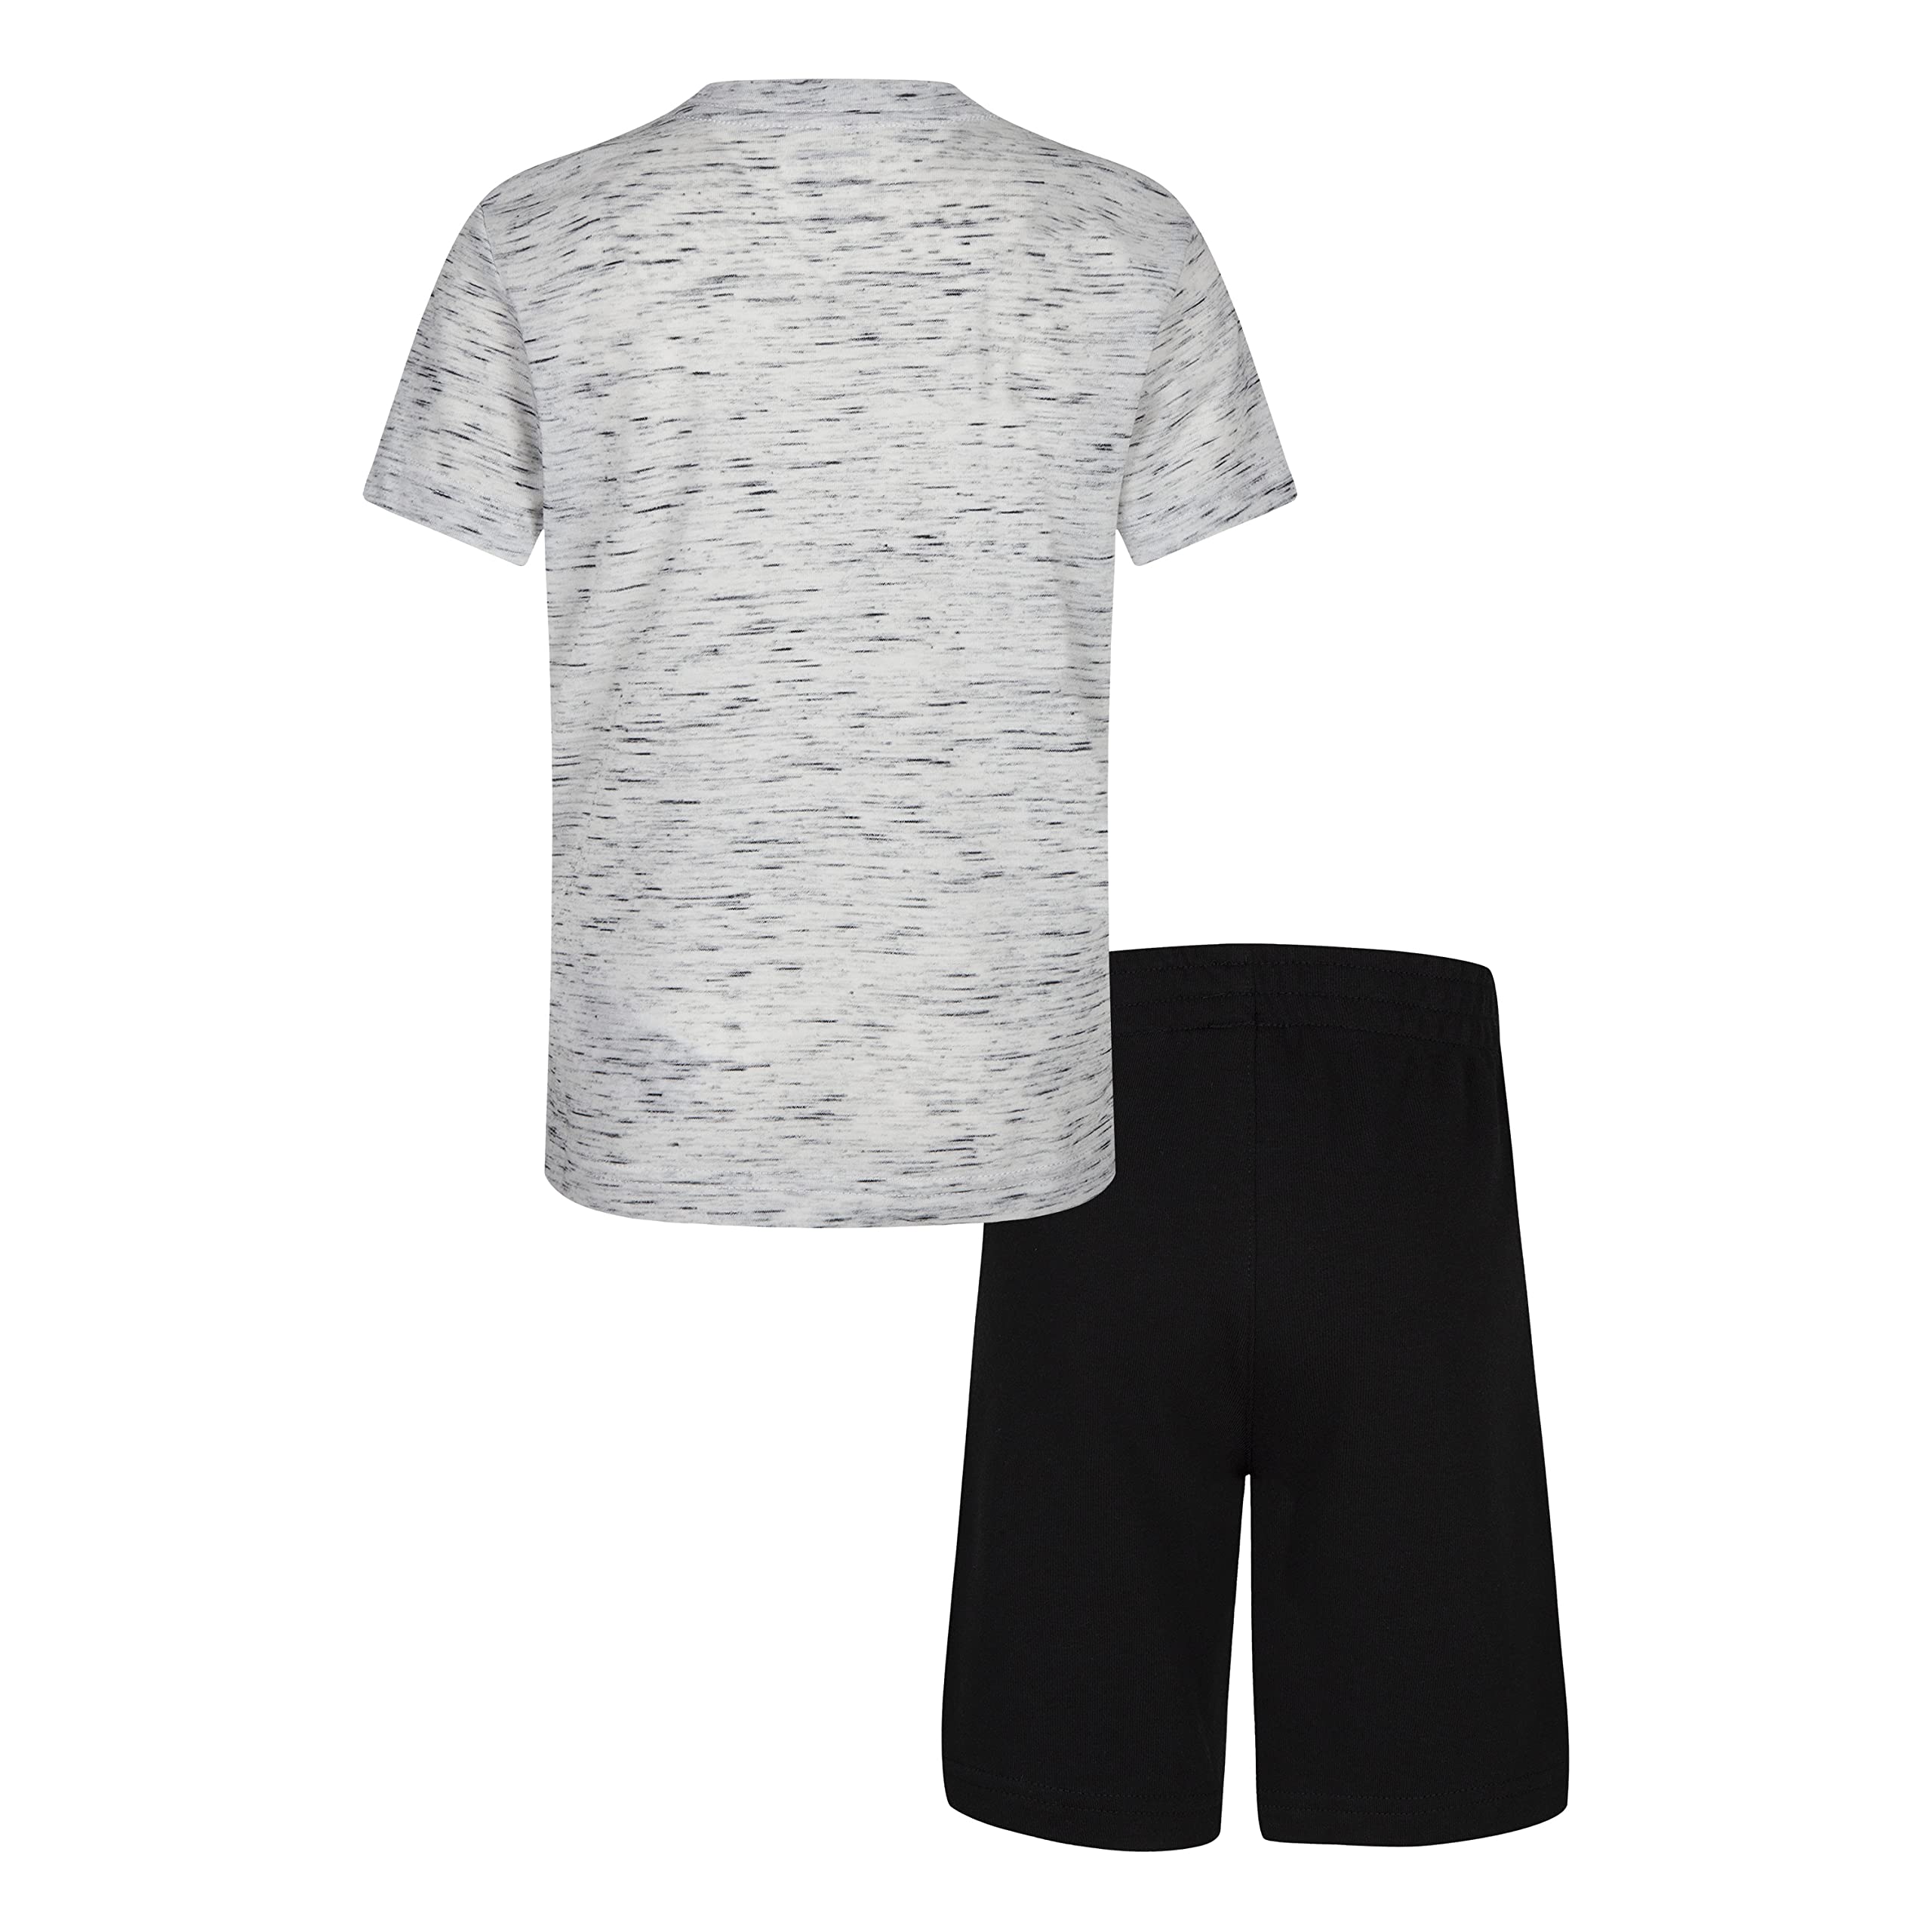 Hurley Boys T-shirt 2-piece Soft Basic T Shirt and Shorts 2 Piece Outfit Set, Black/White, 7 US